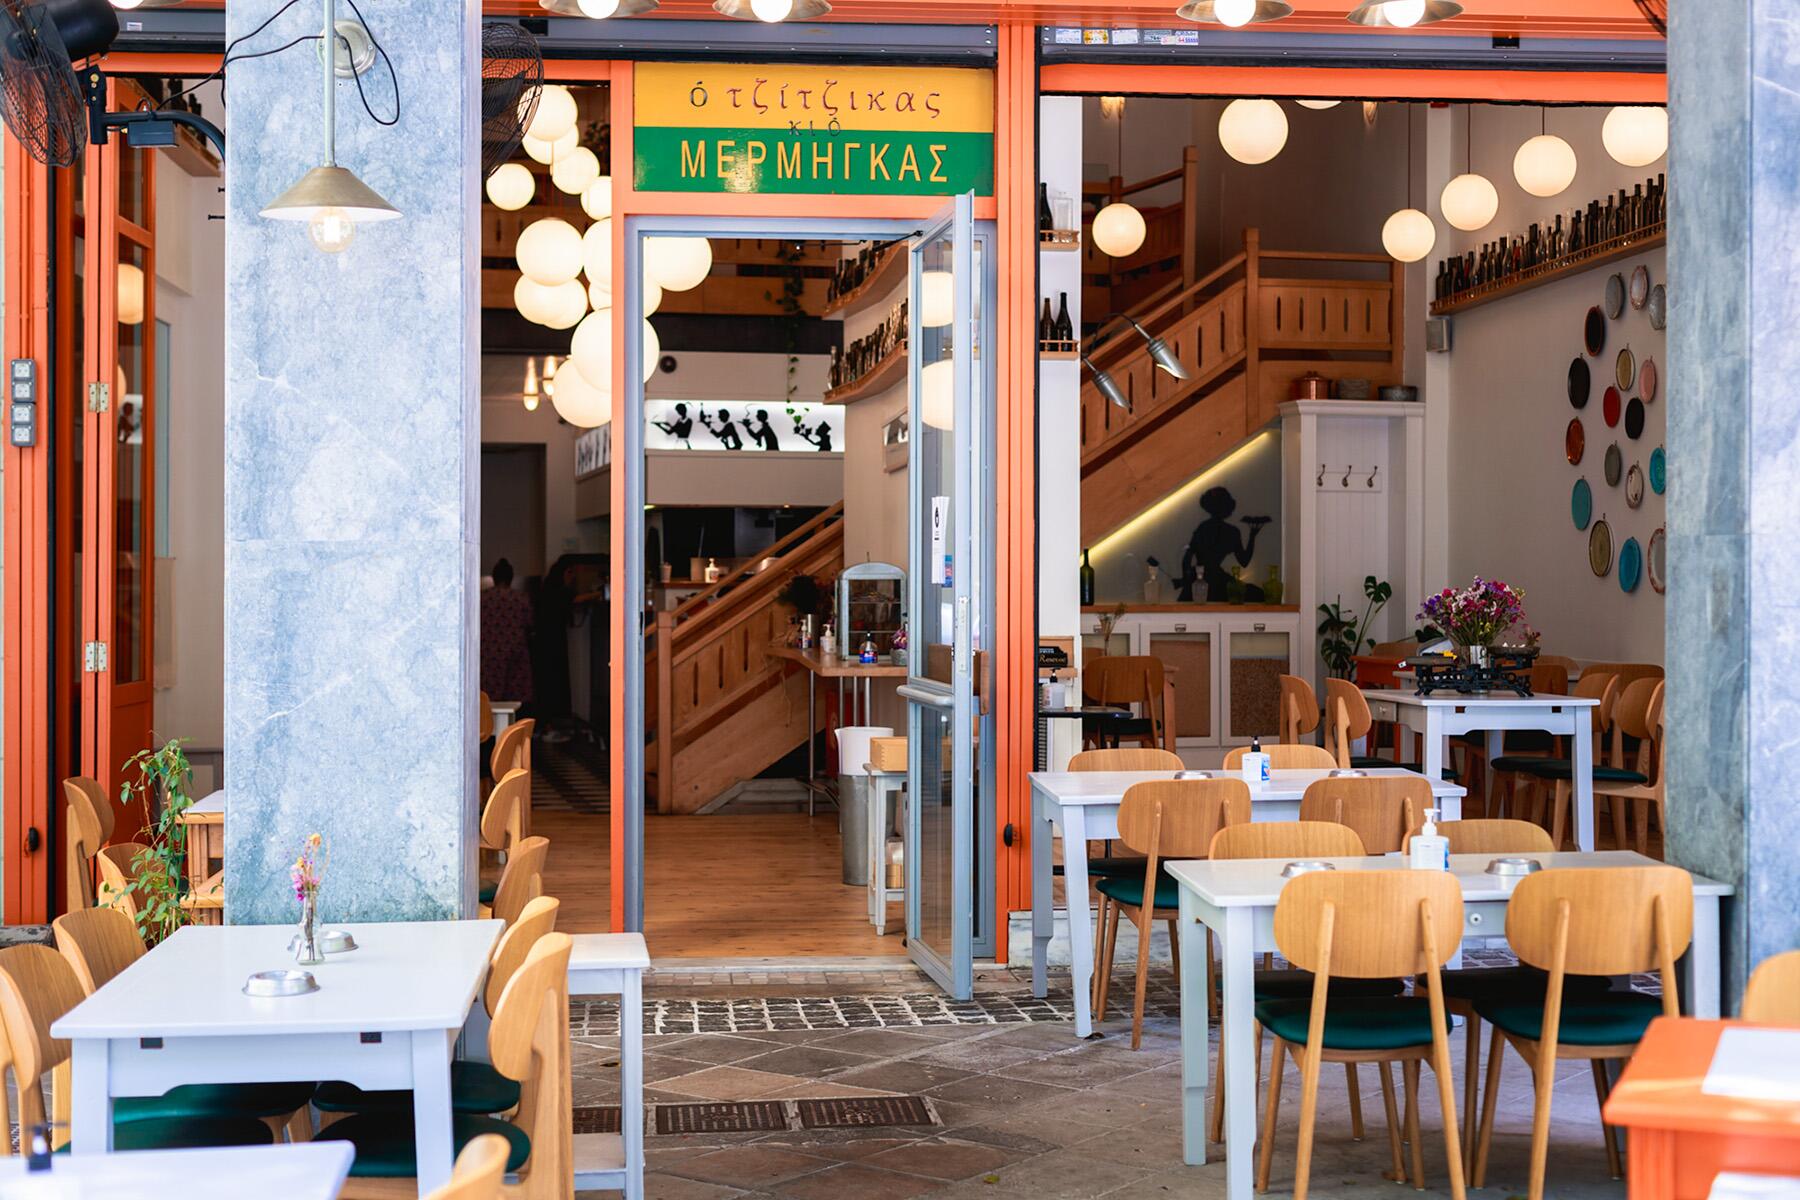 <a href='https://www.fodors.com/world/europe/greece/athens/experiences/news/photos/the-best-restaurants-in-athens#'>From &quot;The 14 Best Restaurants in Athens Are Also Beloved by Locals: O Tzitzikas Ki Mermigas&quot;</a>